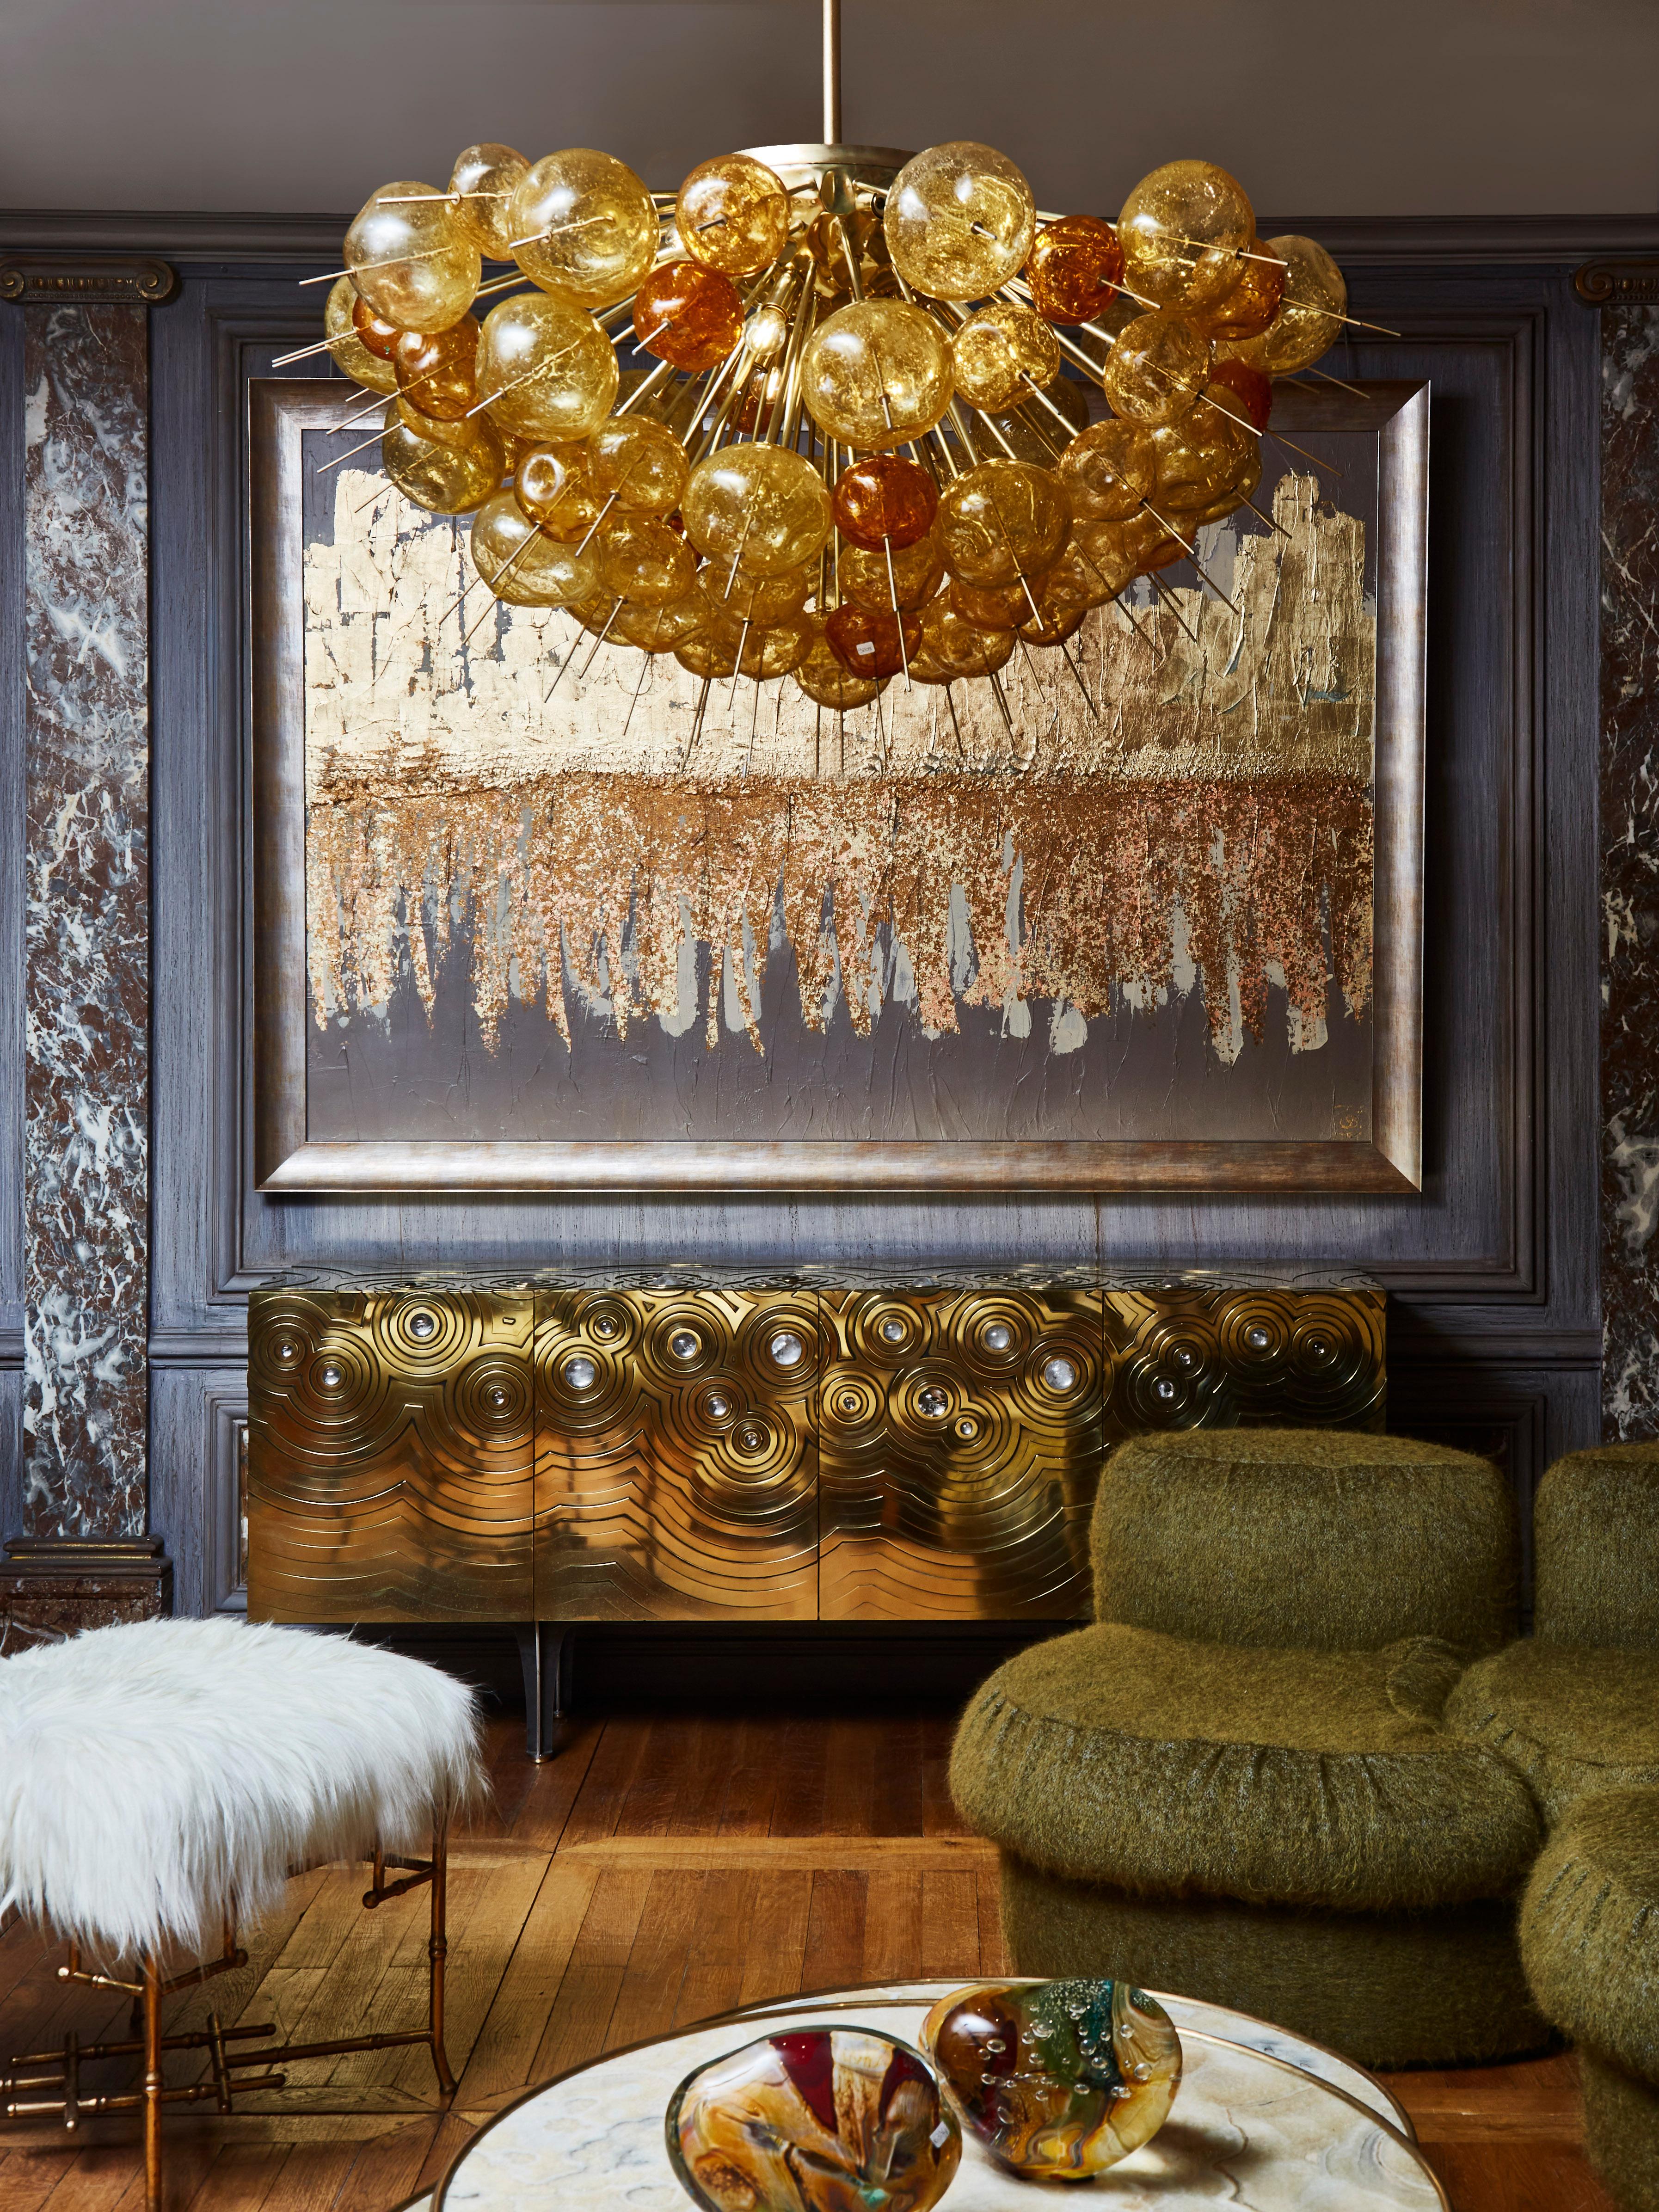 Stunning chandelier in brass with amber tainted and blown Murano glass globes.
Creation by Studio Glustin.
Italy, 2022.